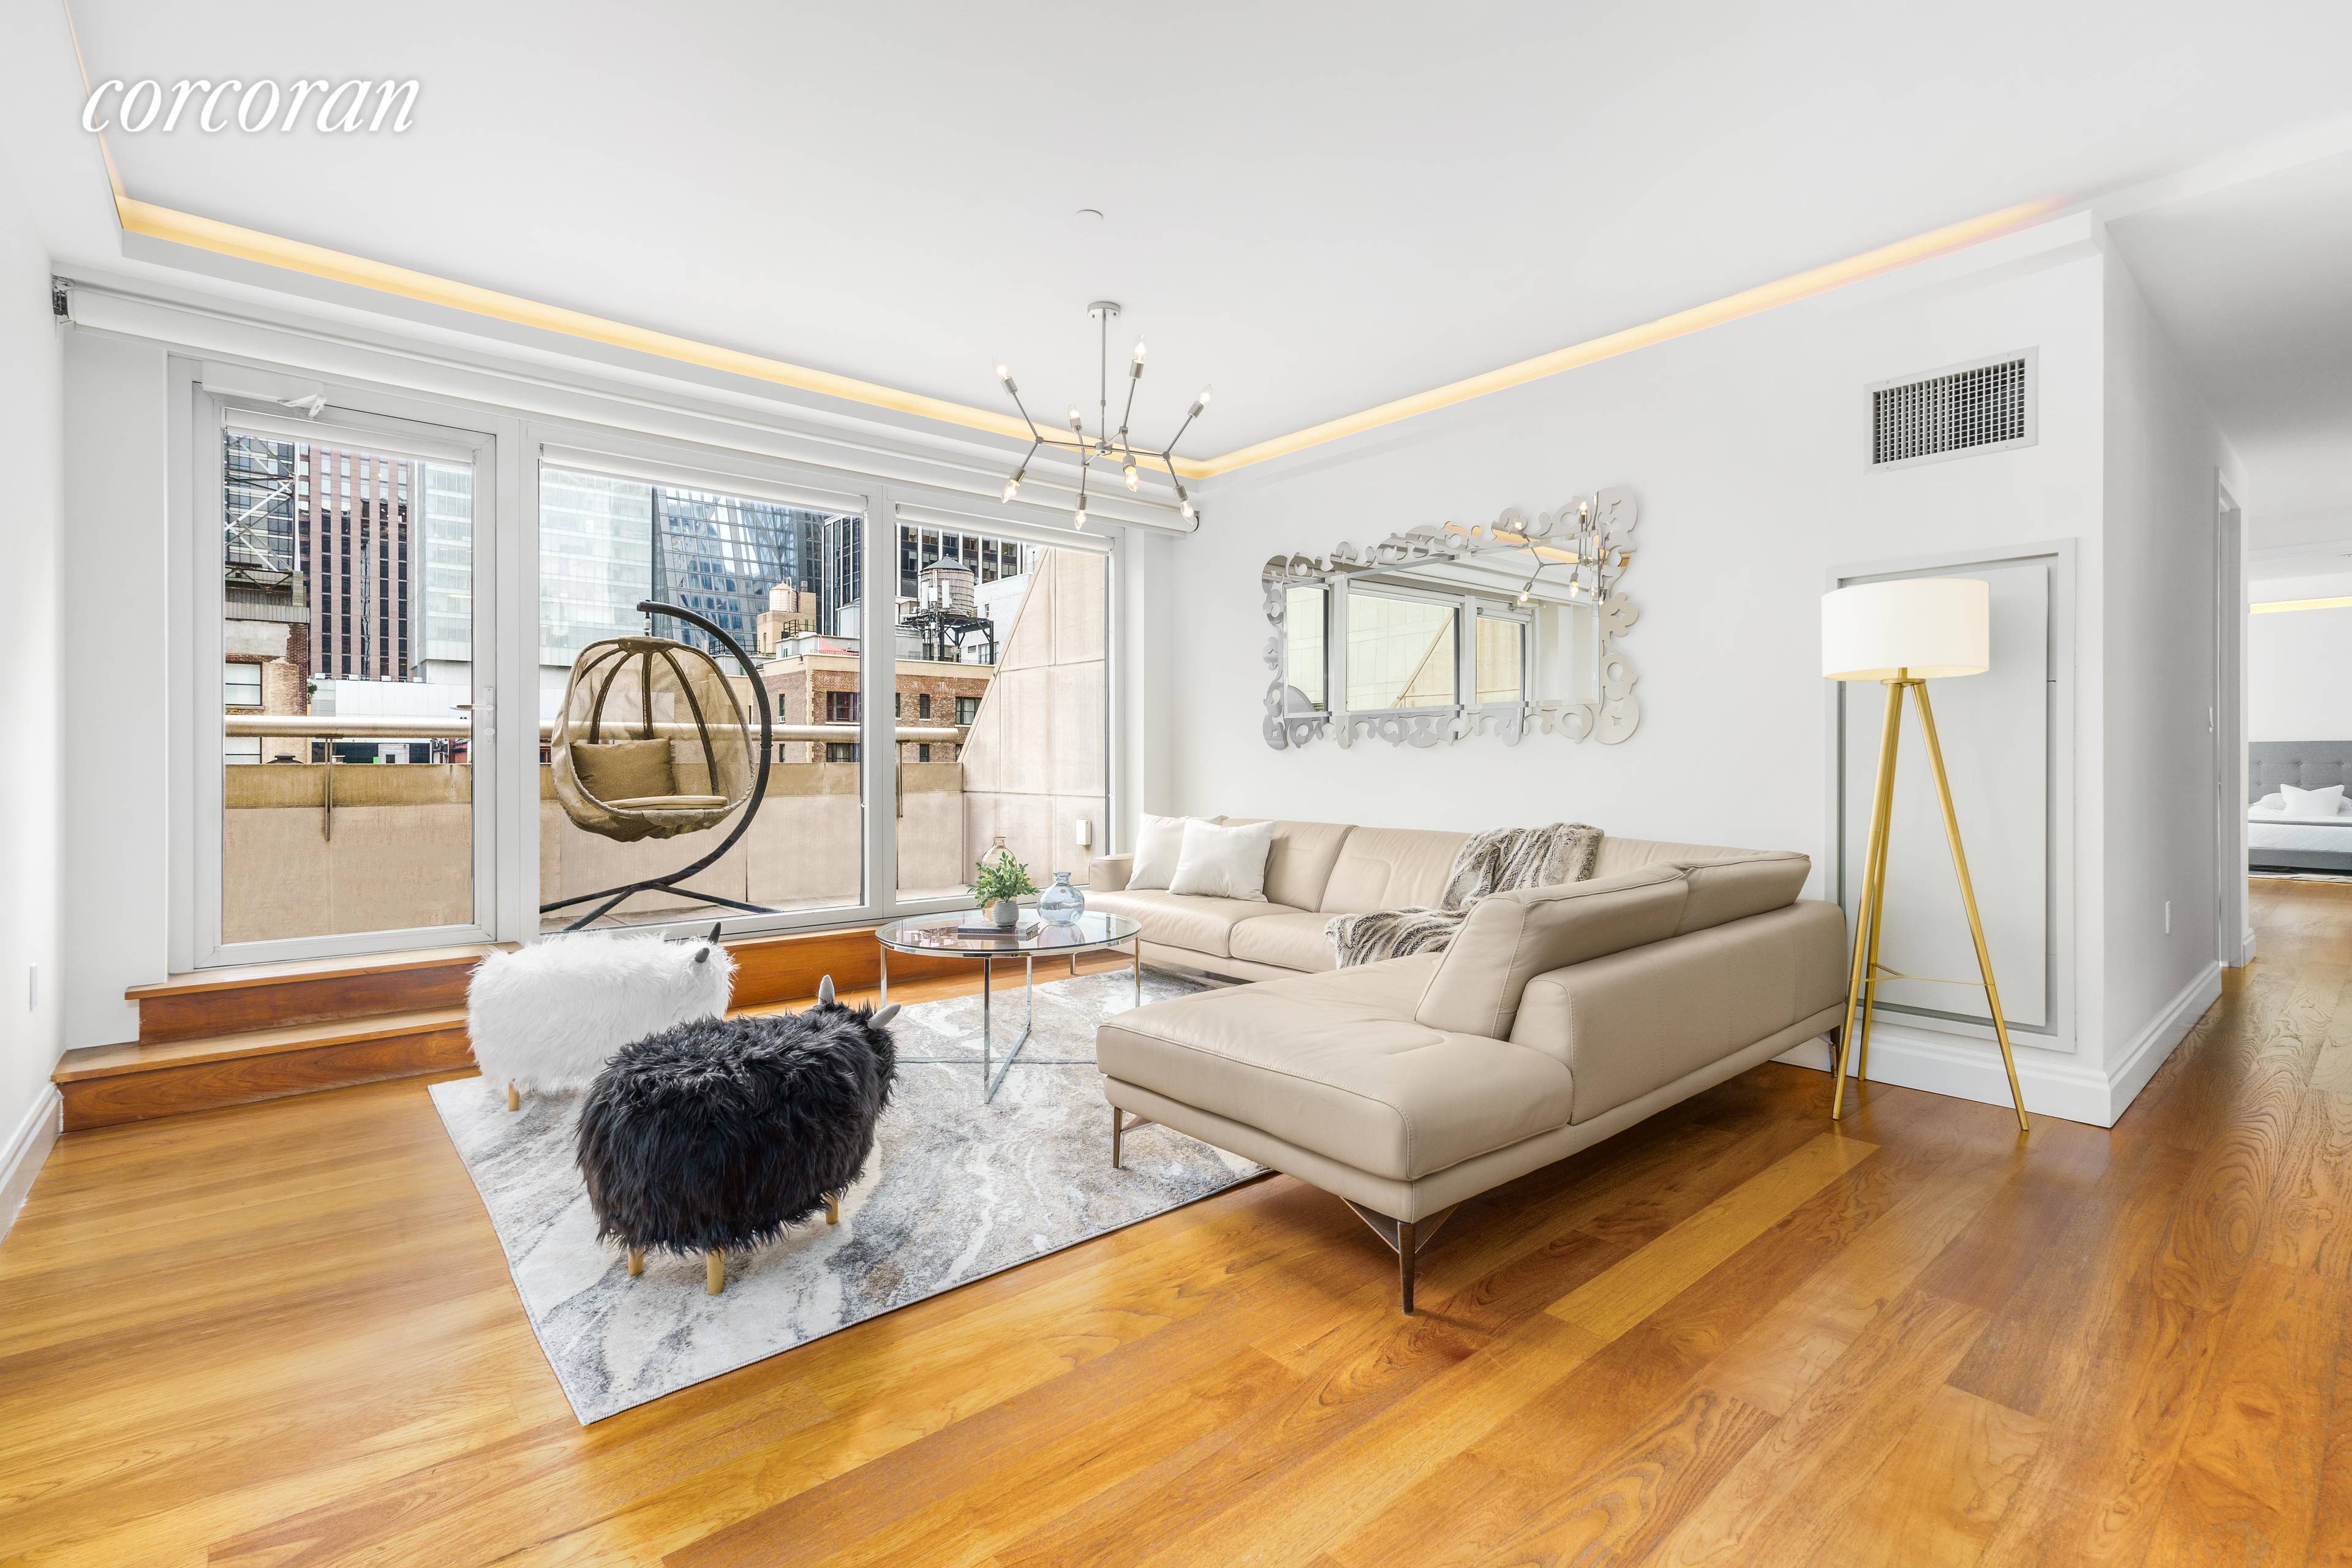 If you've ever dreamed of living in the heart of Manhattan, yet having a serene respite from city life, this is your opportunity !